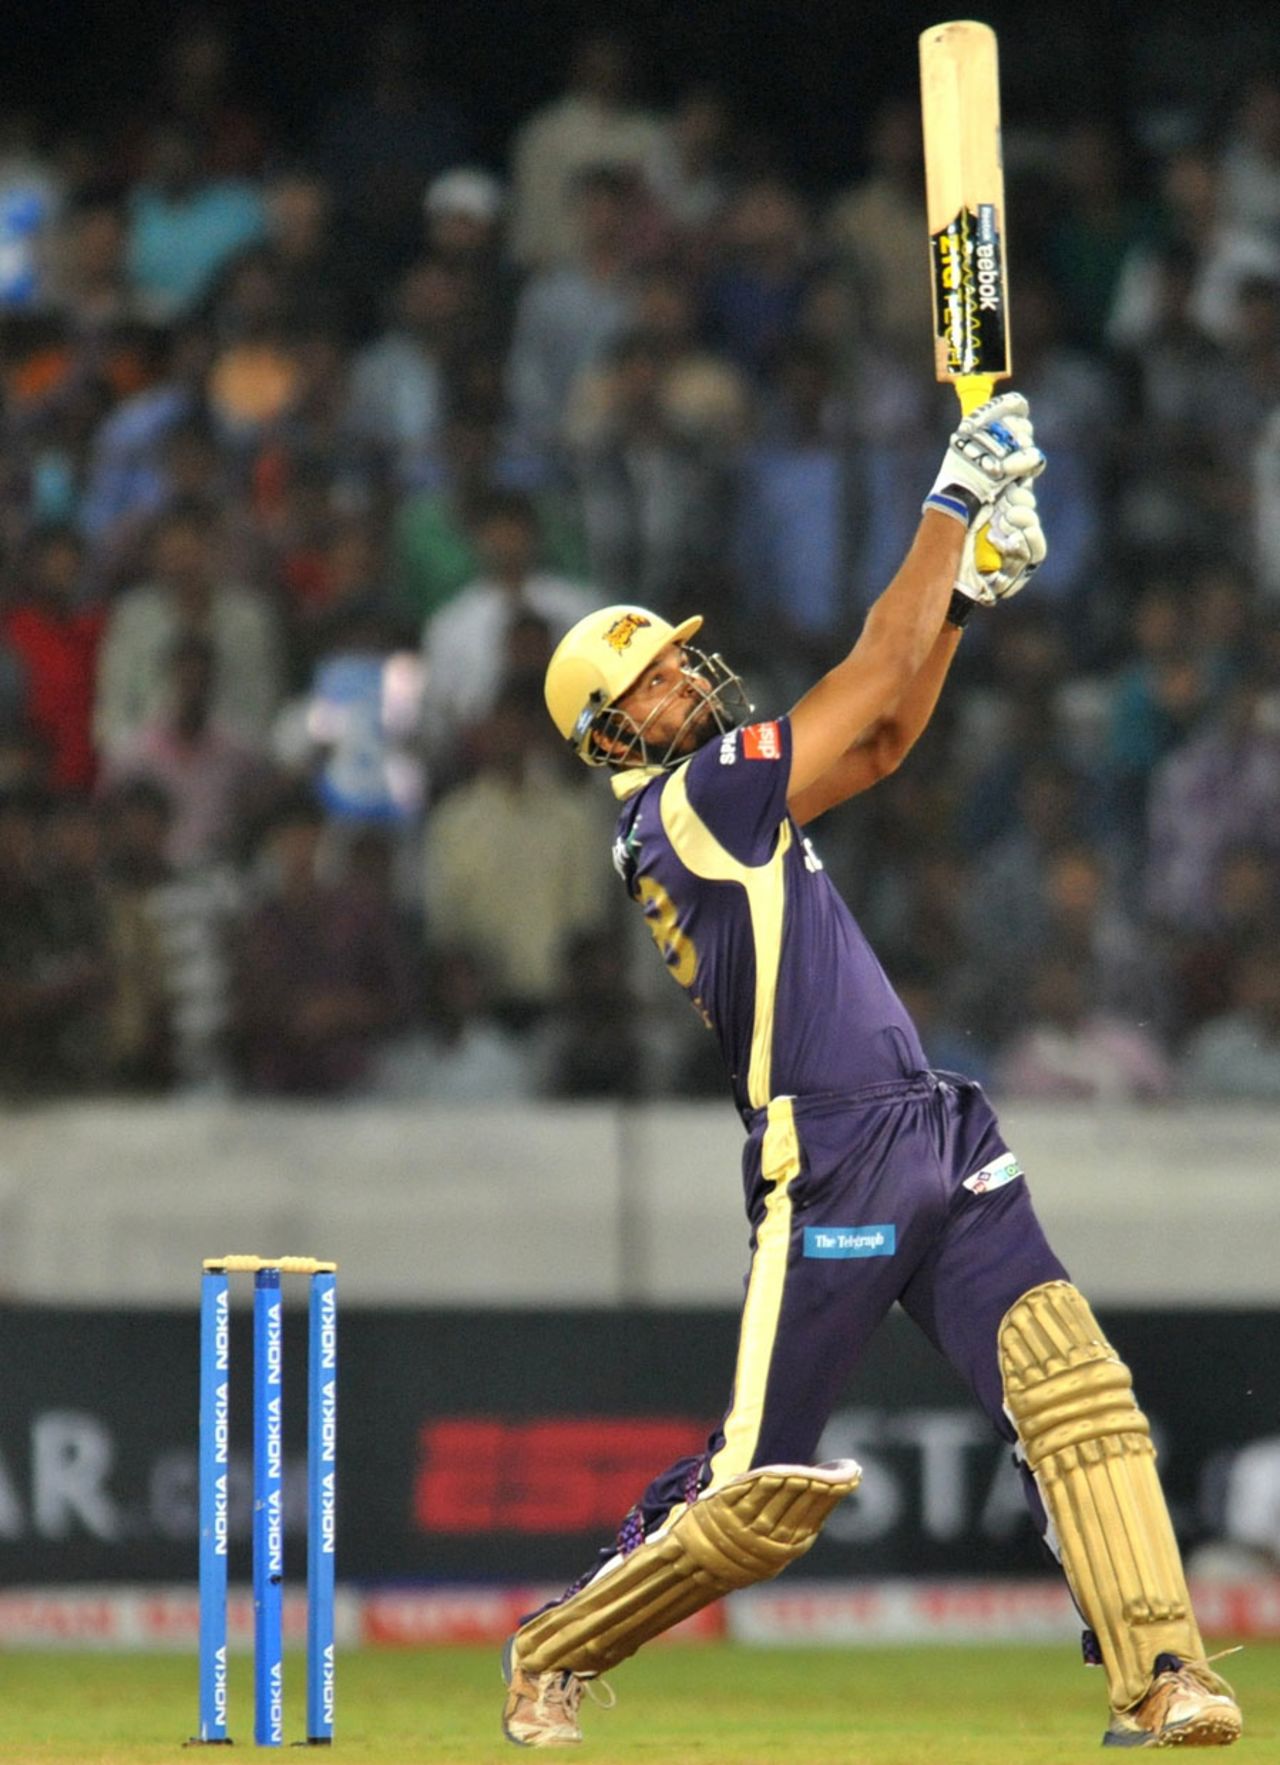 Yusuf Pathan hits one straight up in the air, Kolkata Knight Riders v Somerset, CLT20 qualifier, Hyderabad, September 21, 2011